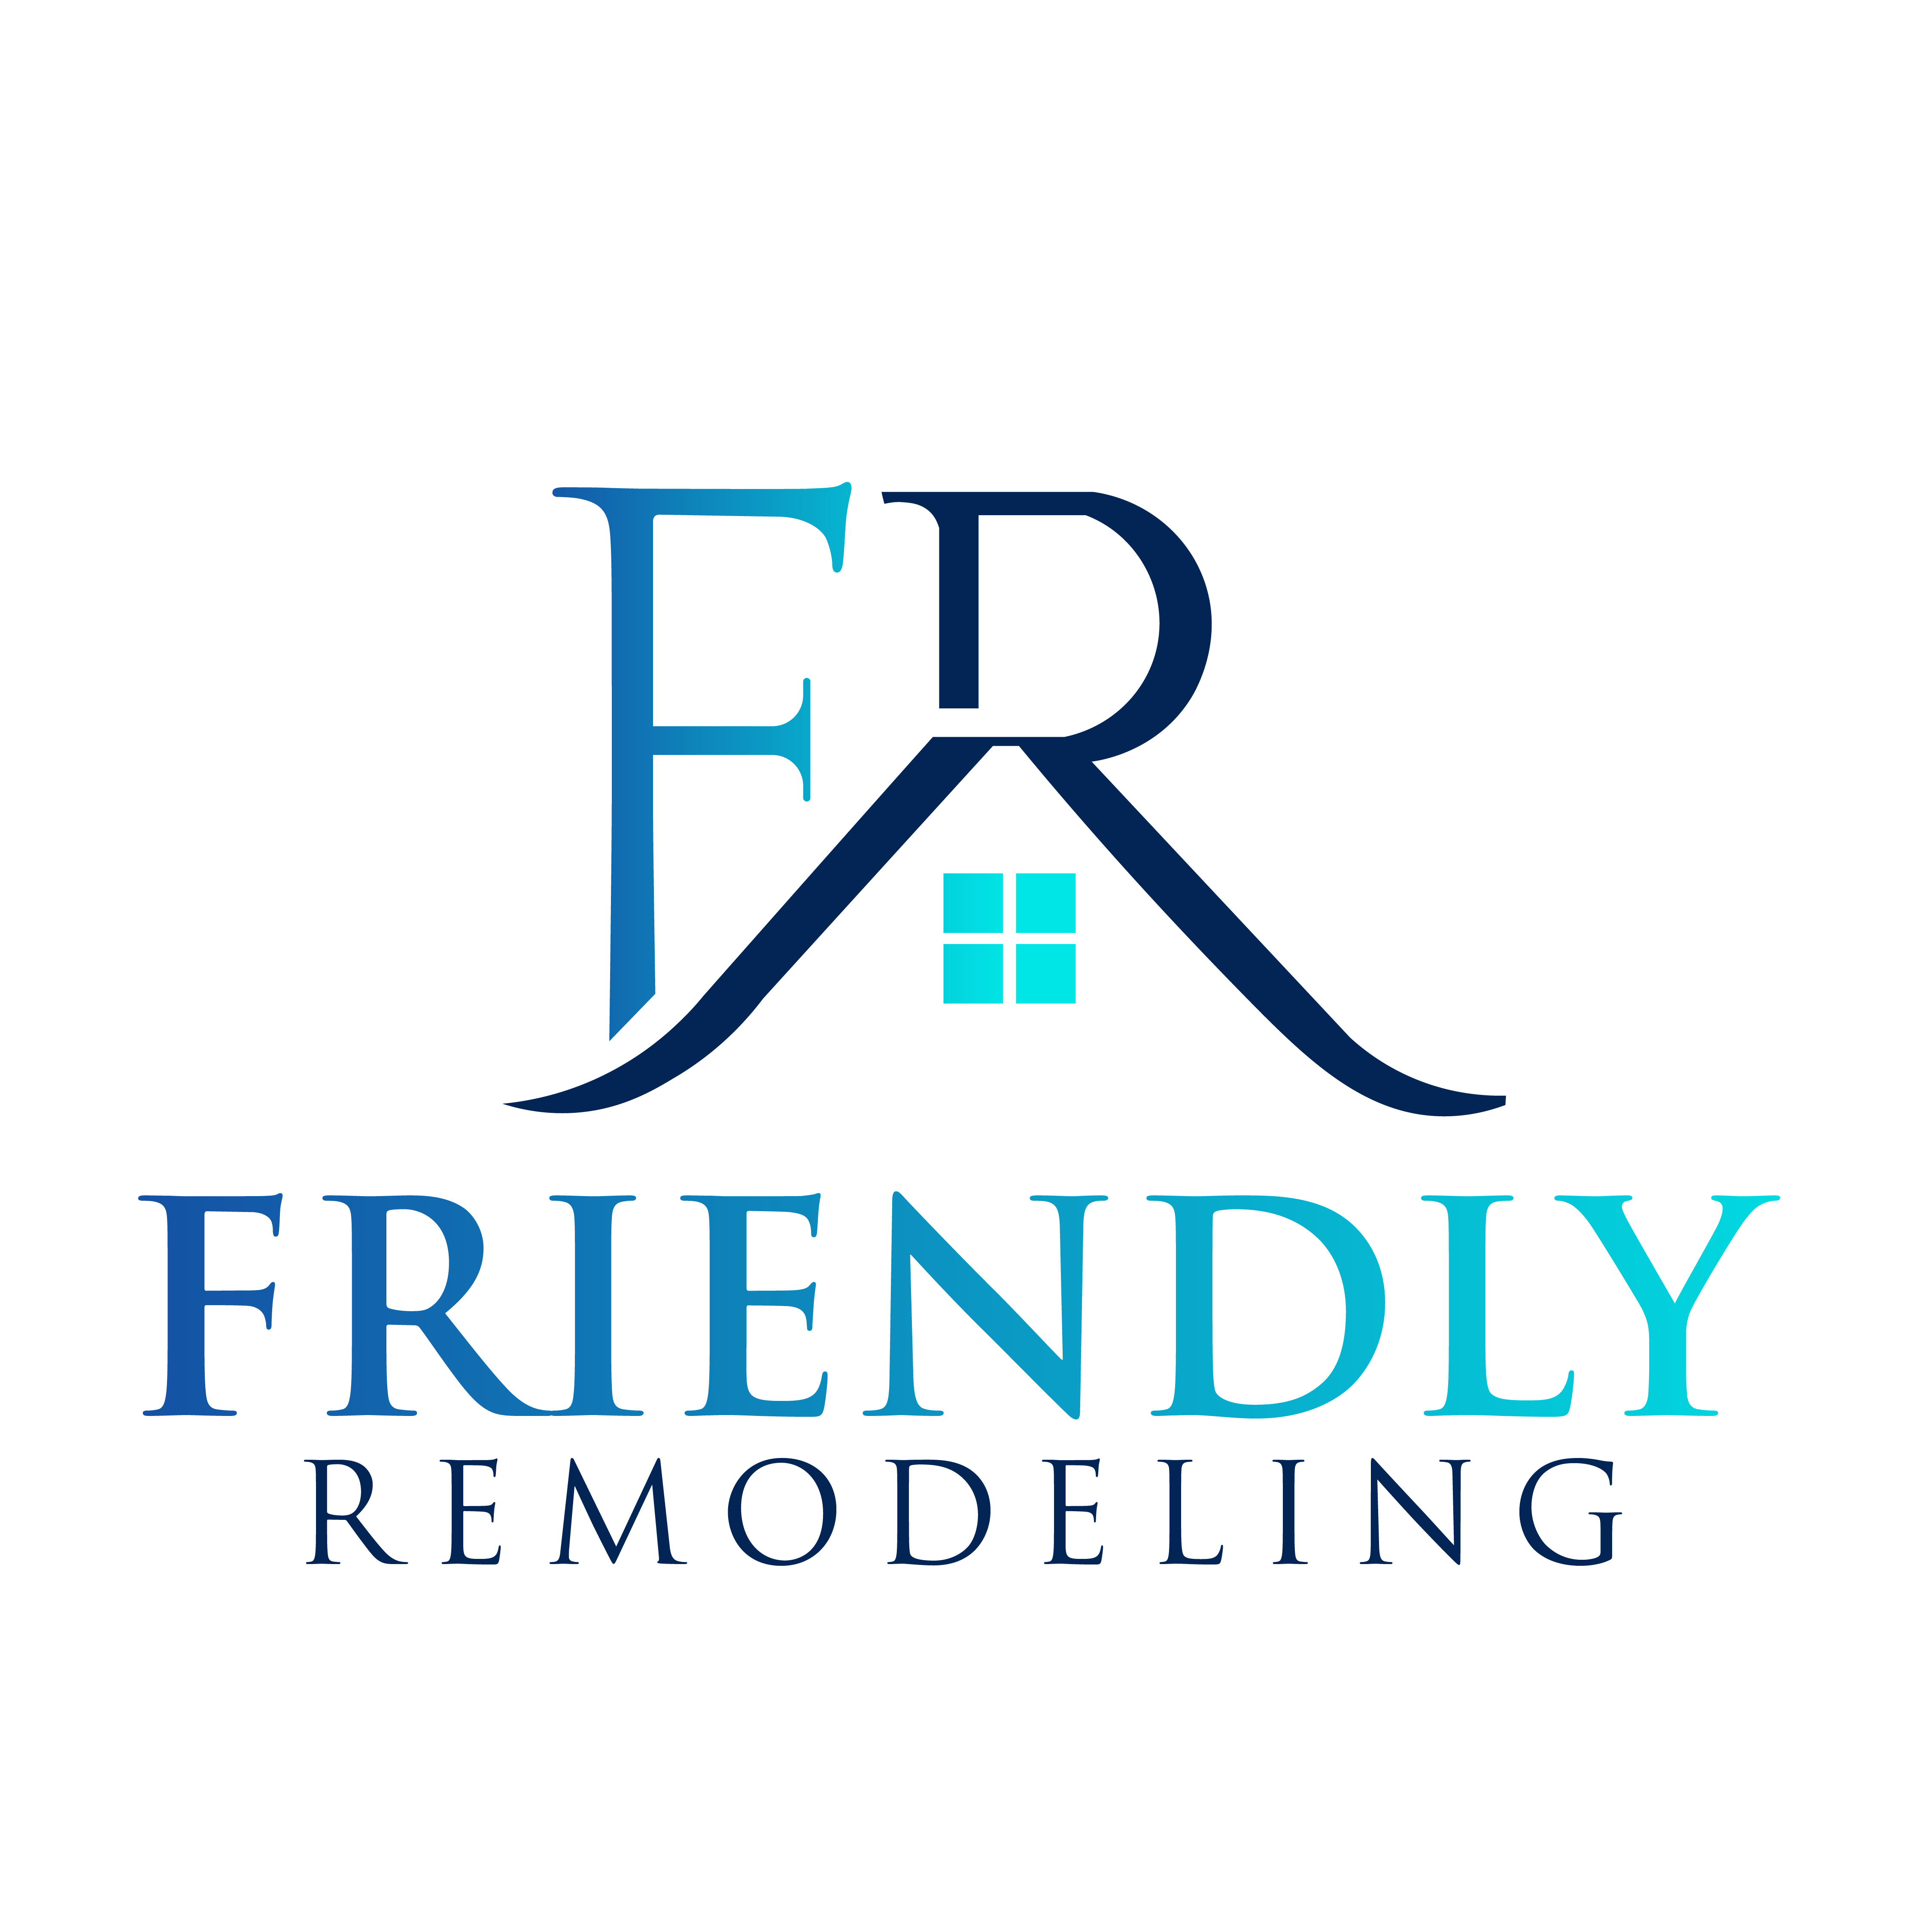 Friendly Remodeling Sunbow Logo